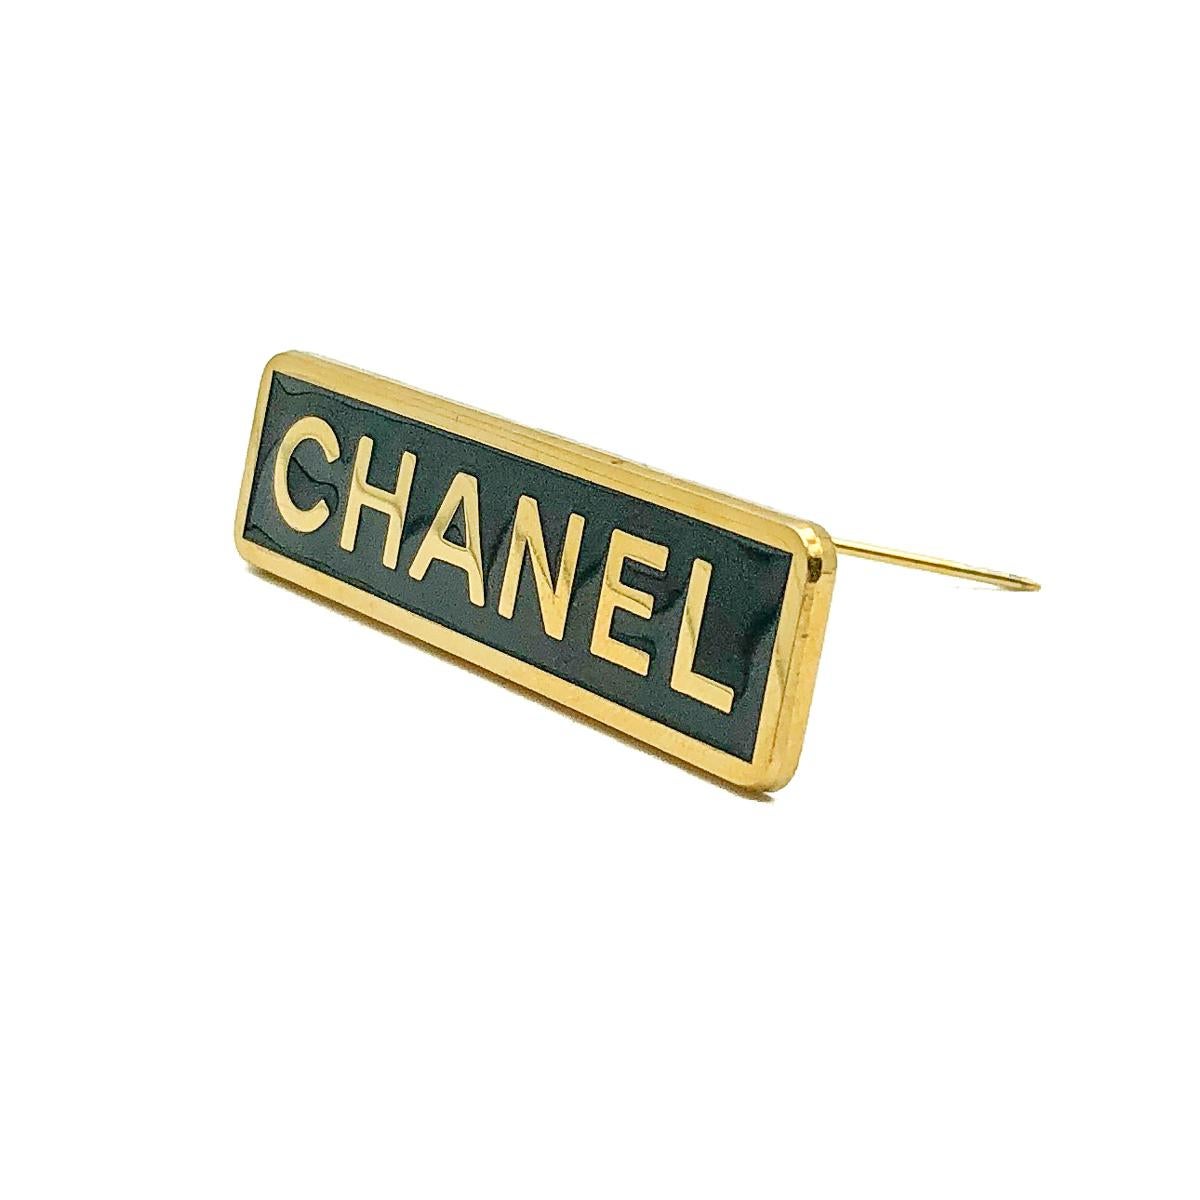 A Vintage Chanel Enamel Employee Pin. Crafted in black enamel punctuated with the iconic brand name CHANEL.
Vintage Condition: Very good without damage or noteworthy wear.
Materials: Gold plated brass, enamel
Signed: These pieces were not